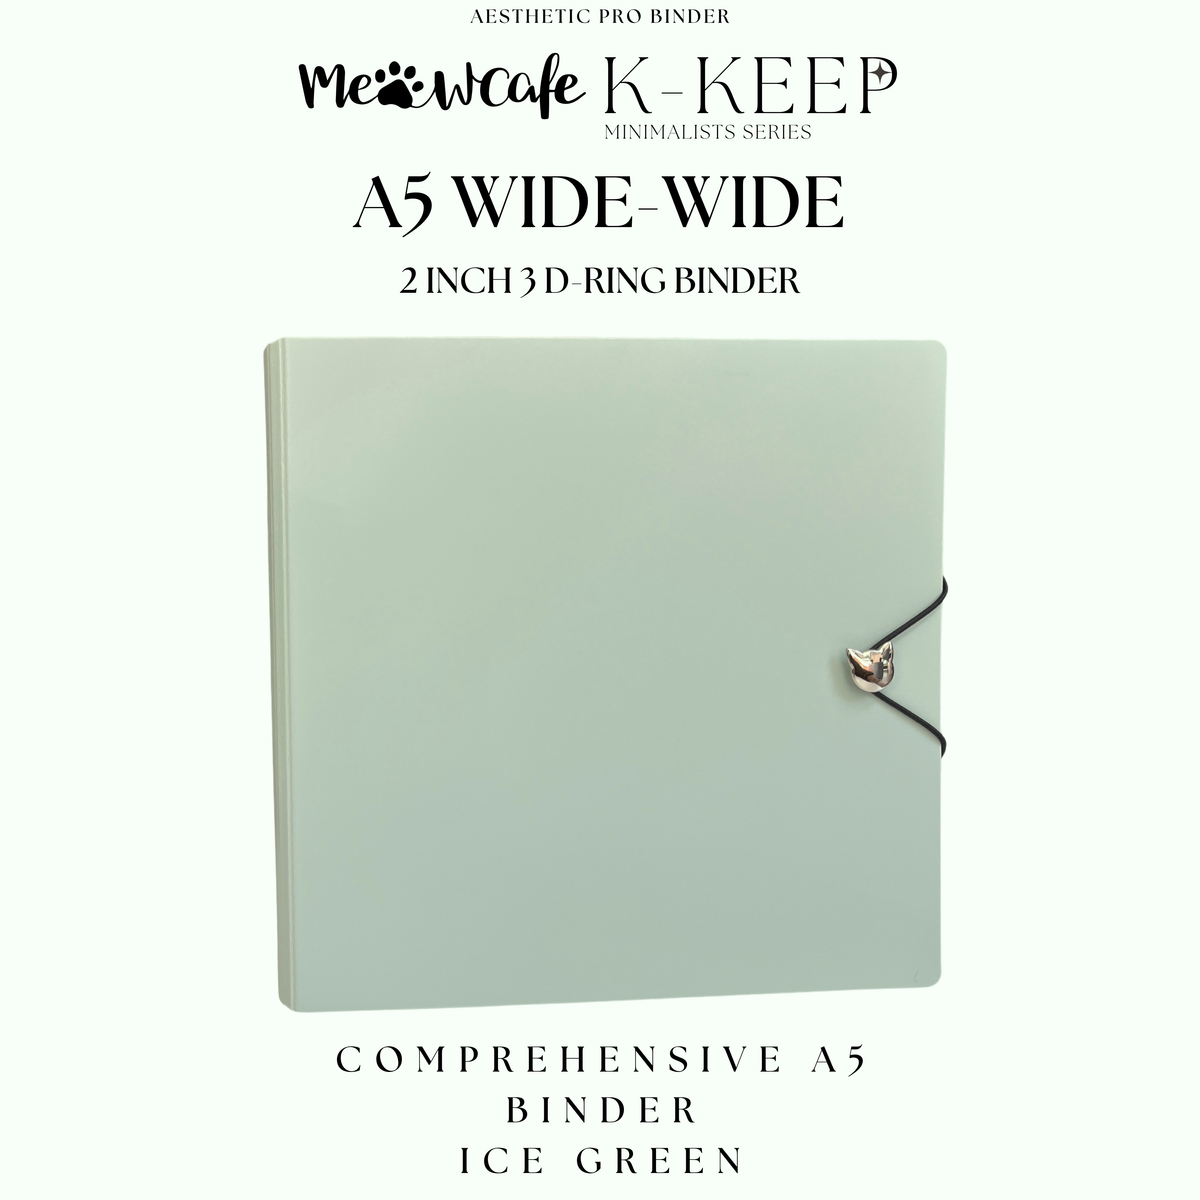 K-KEEP [A5 Wide]  - [2 inch] - [Minimalist Series]  - The Most Comprehensive and Largest A5 Binder Specially Designed for Kpop Collector - Ice Green